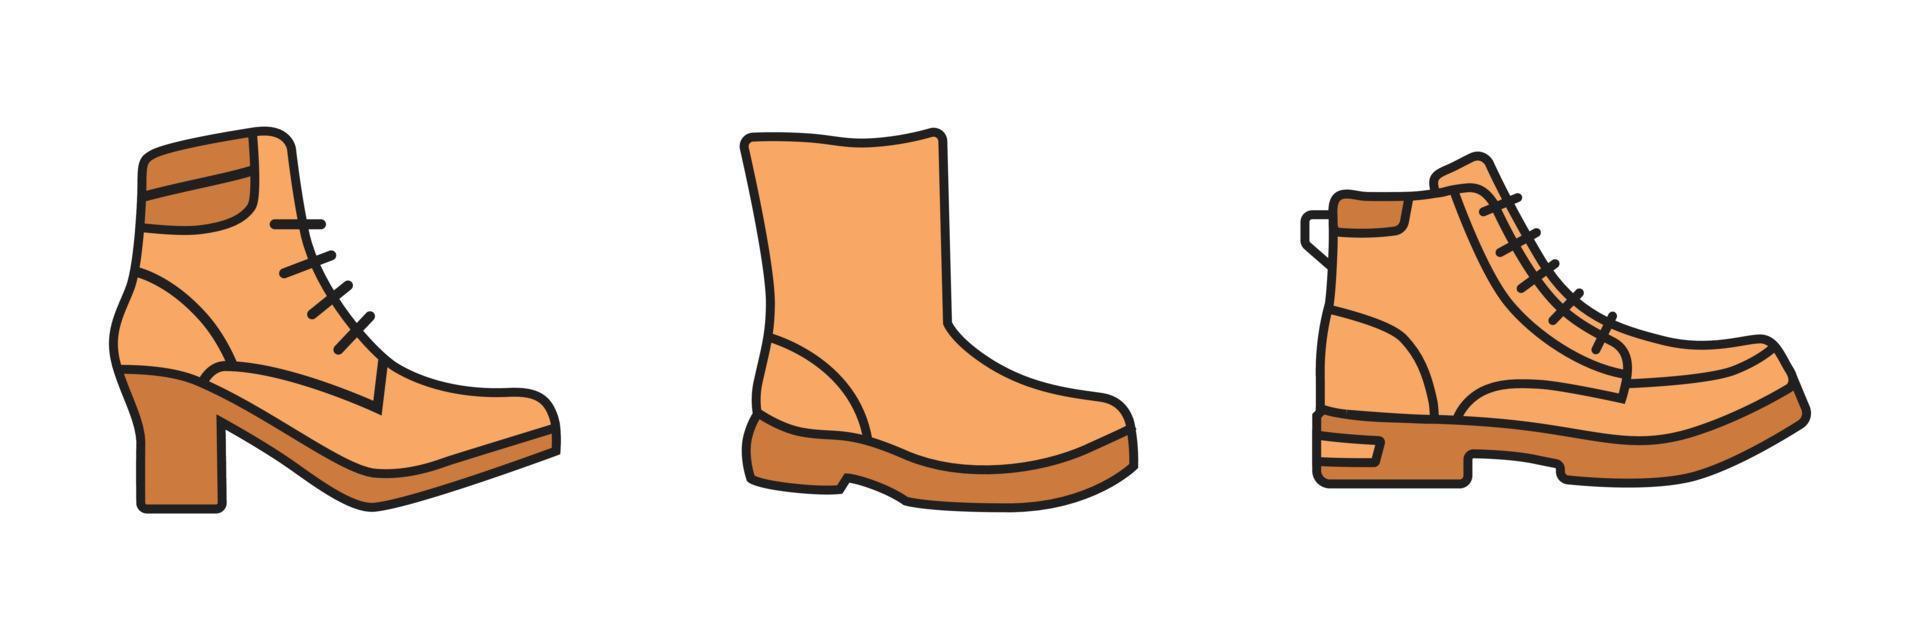 a collection of boots for fashion and beauty in vector illustrations